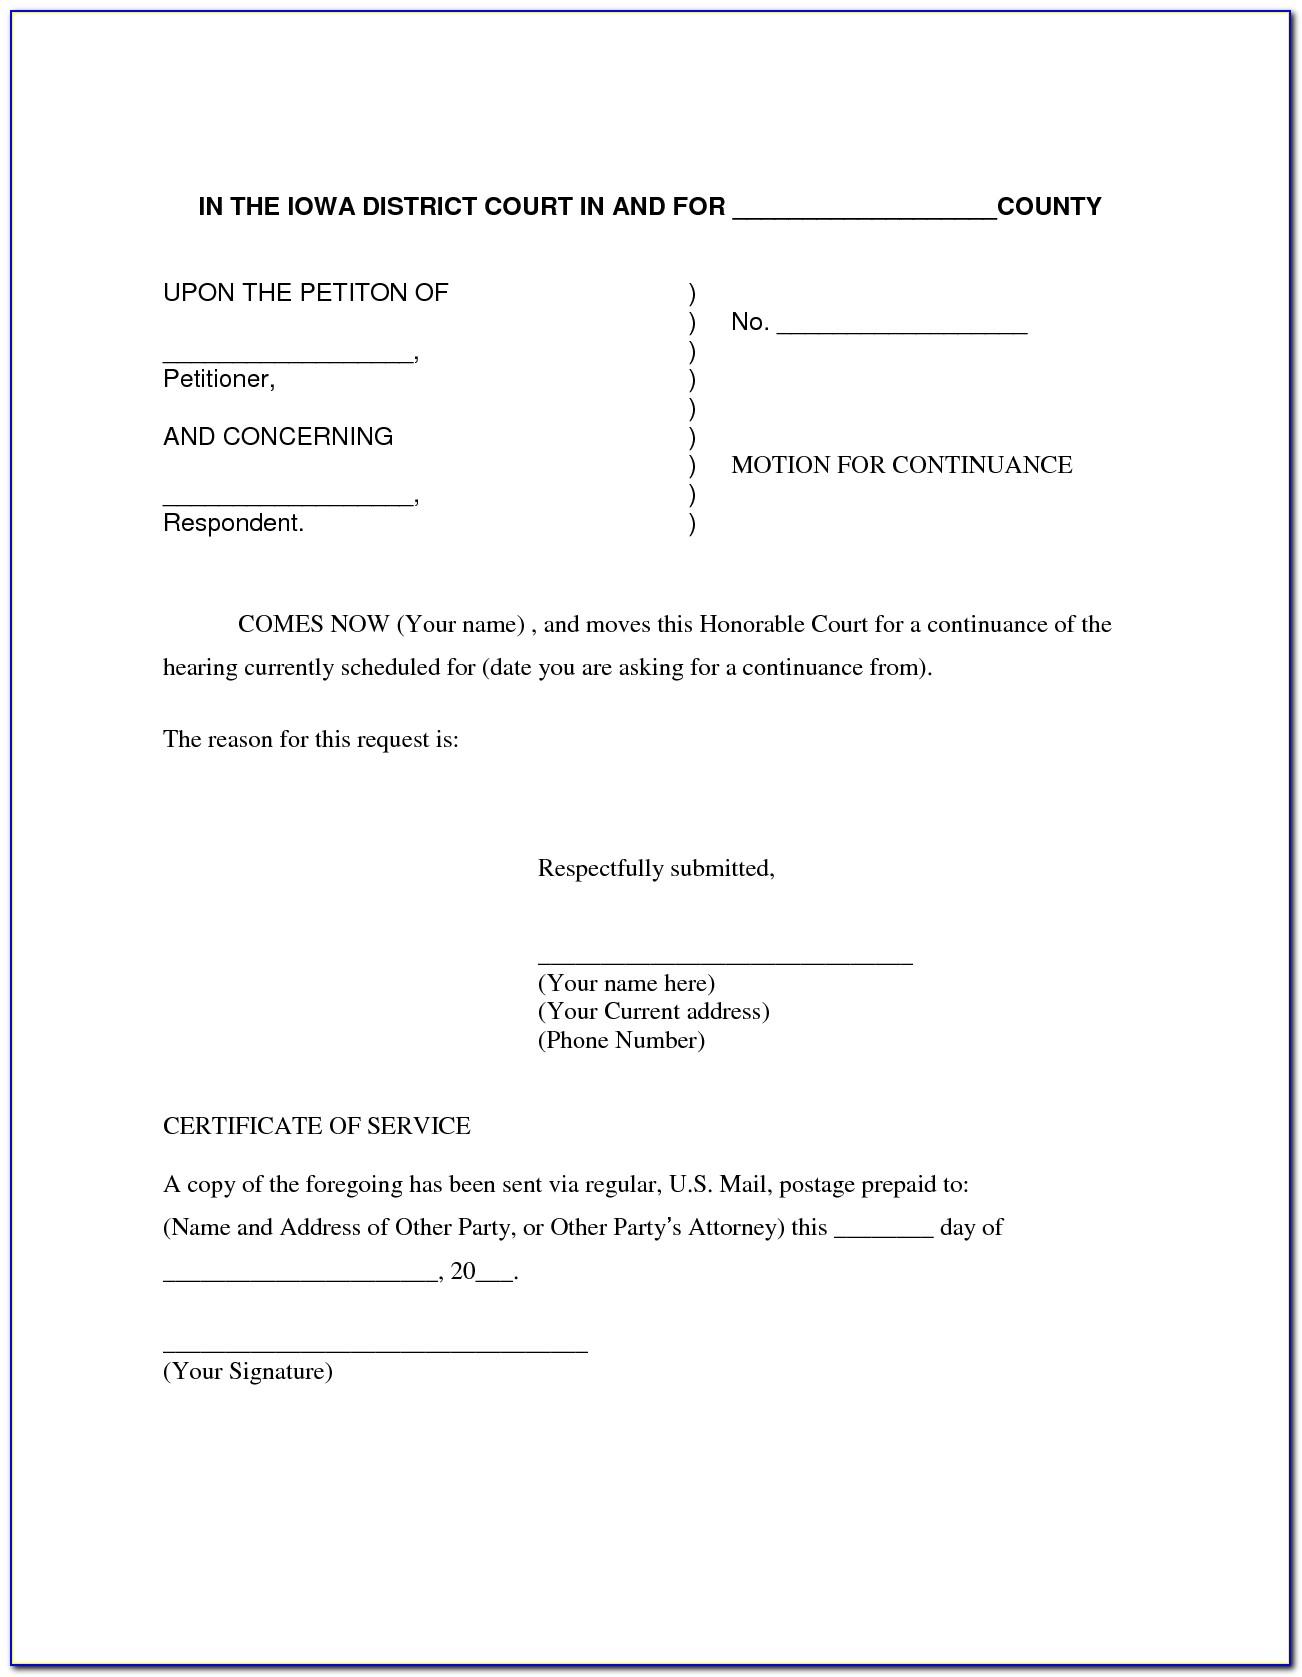 texas-agreed-motion-for-continuance-form